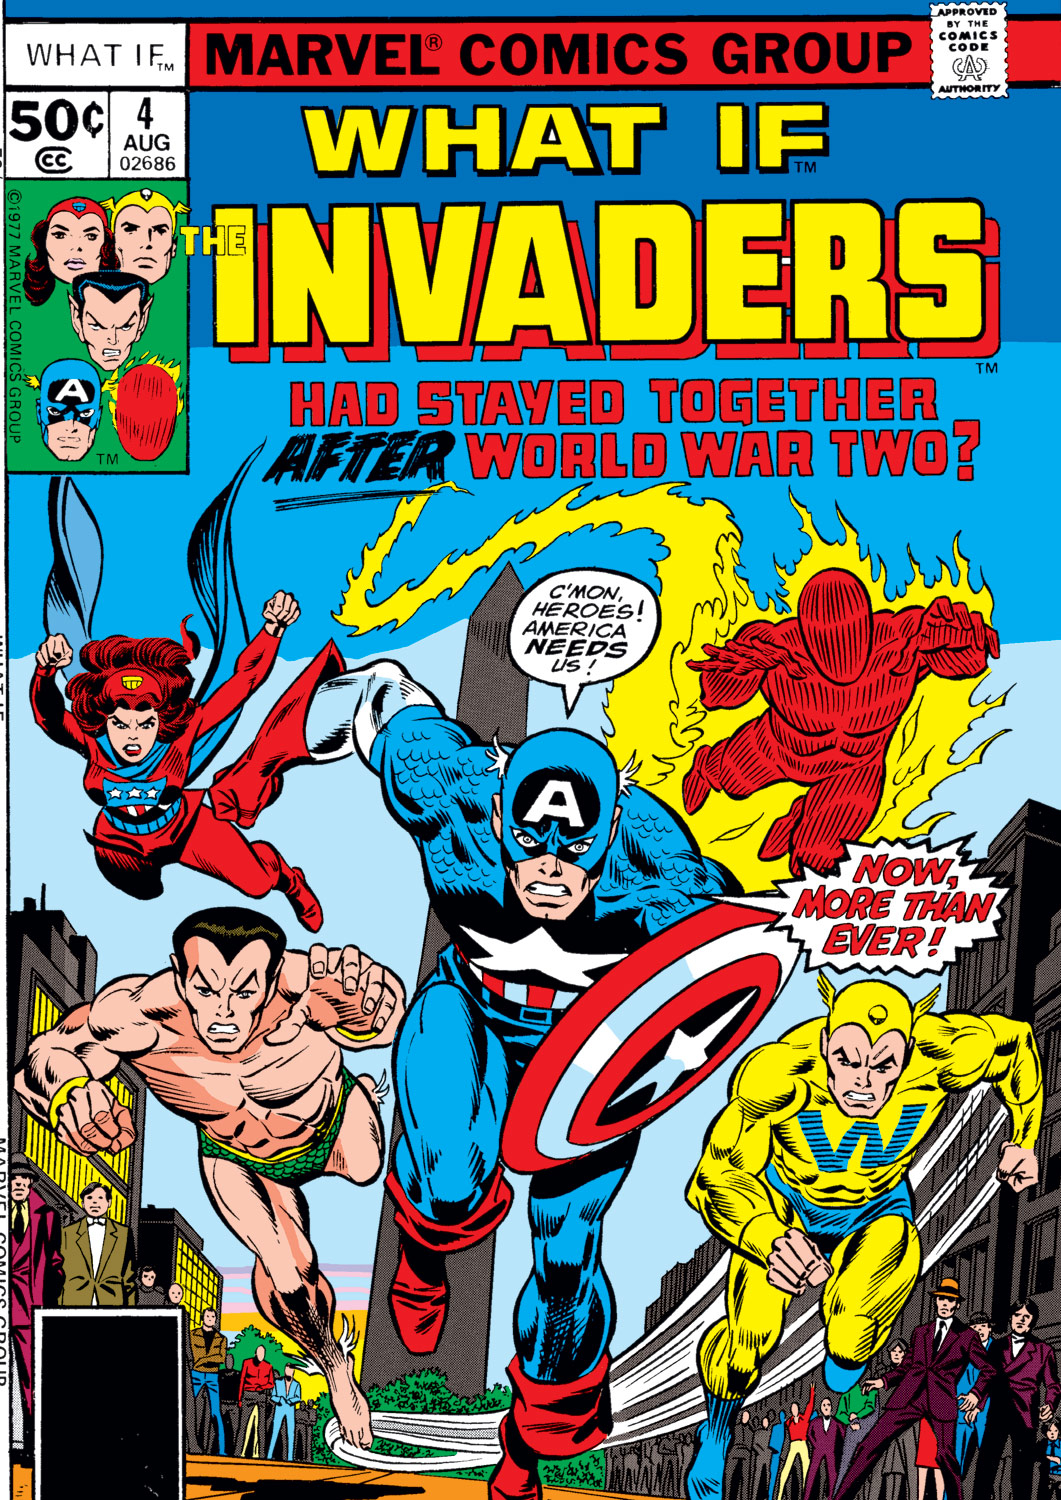 What If? (1977) Issue #4 - The Invaders had stayed together after World War Two #4 - English 1